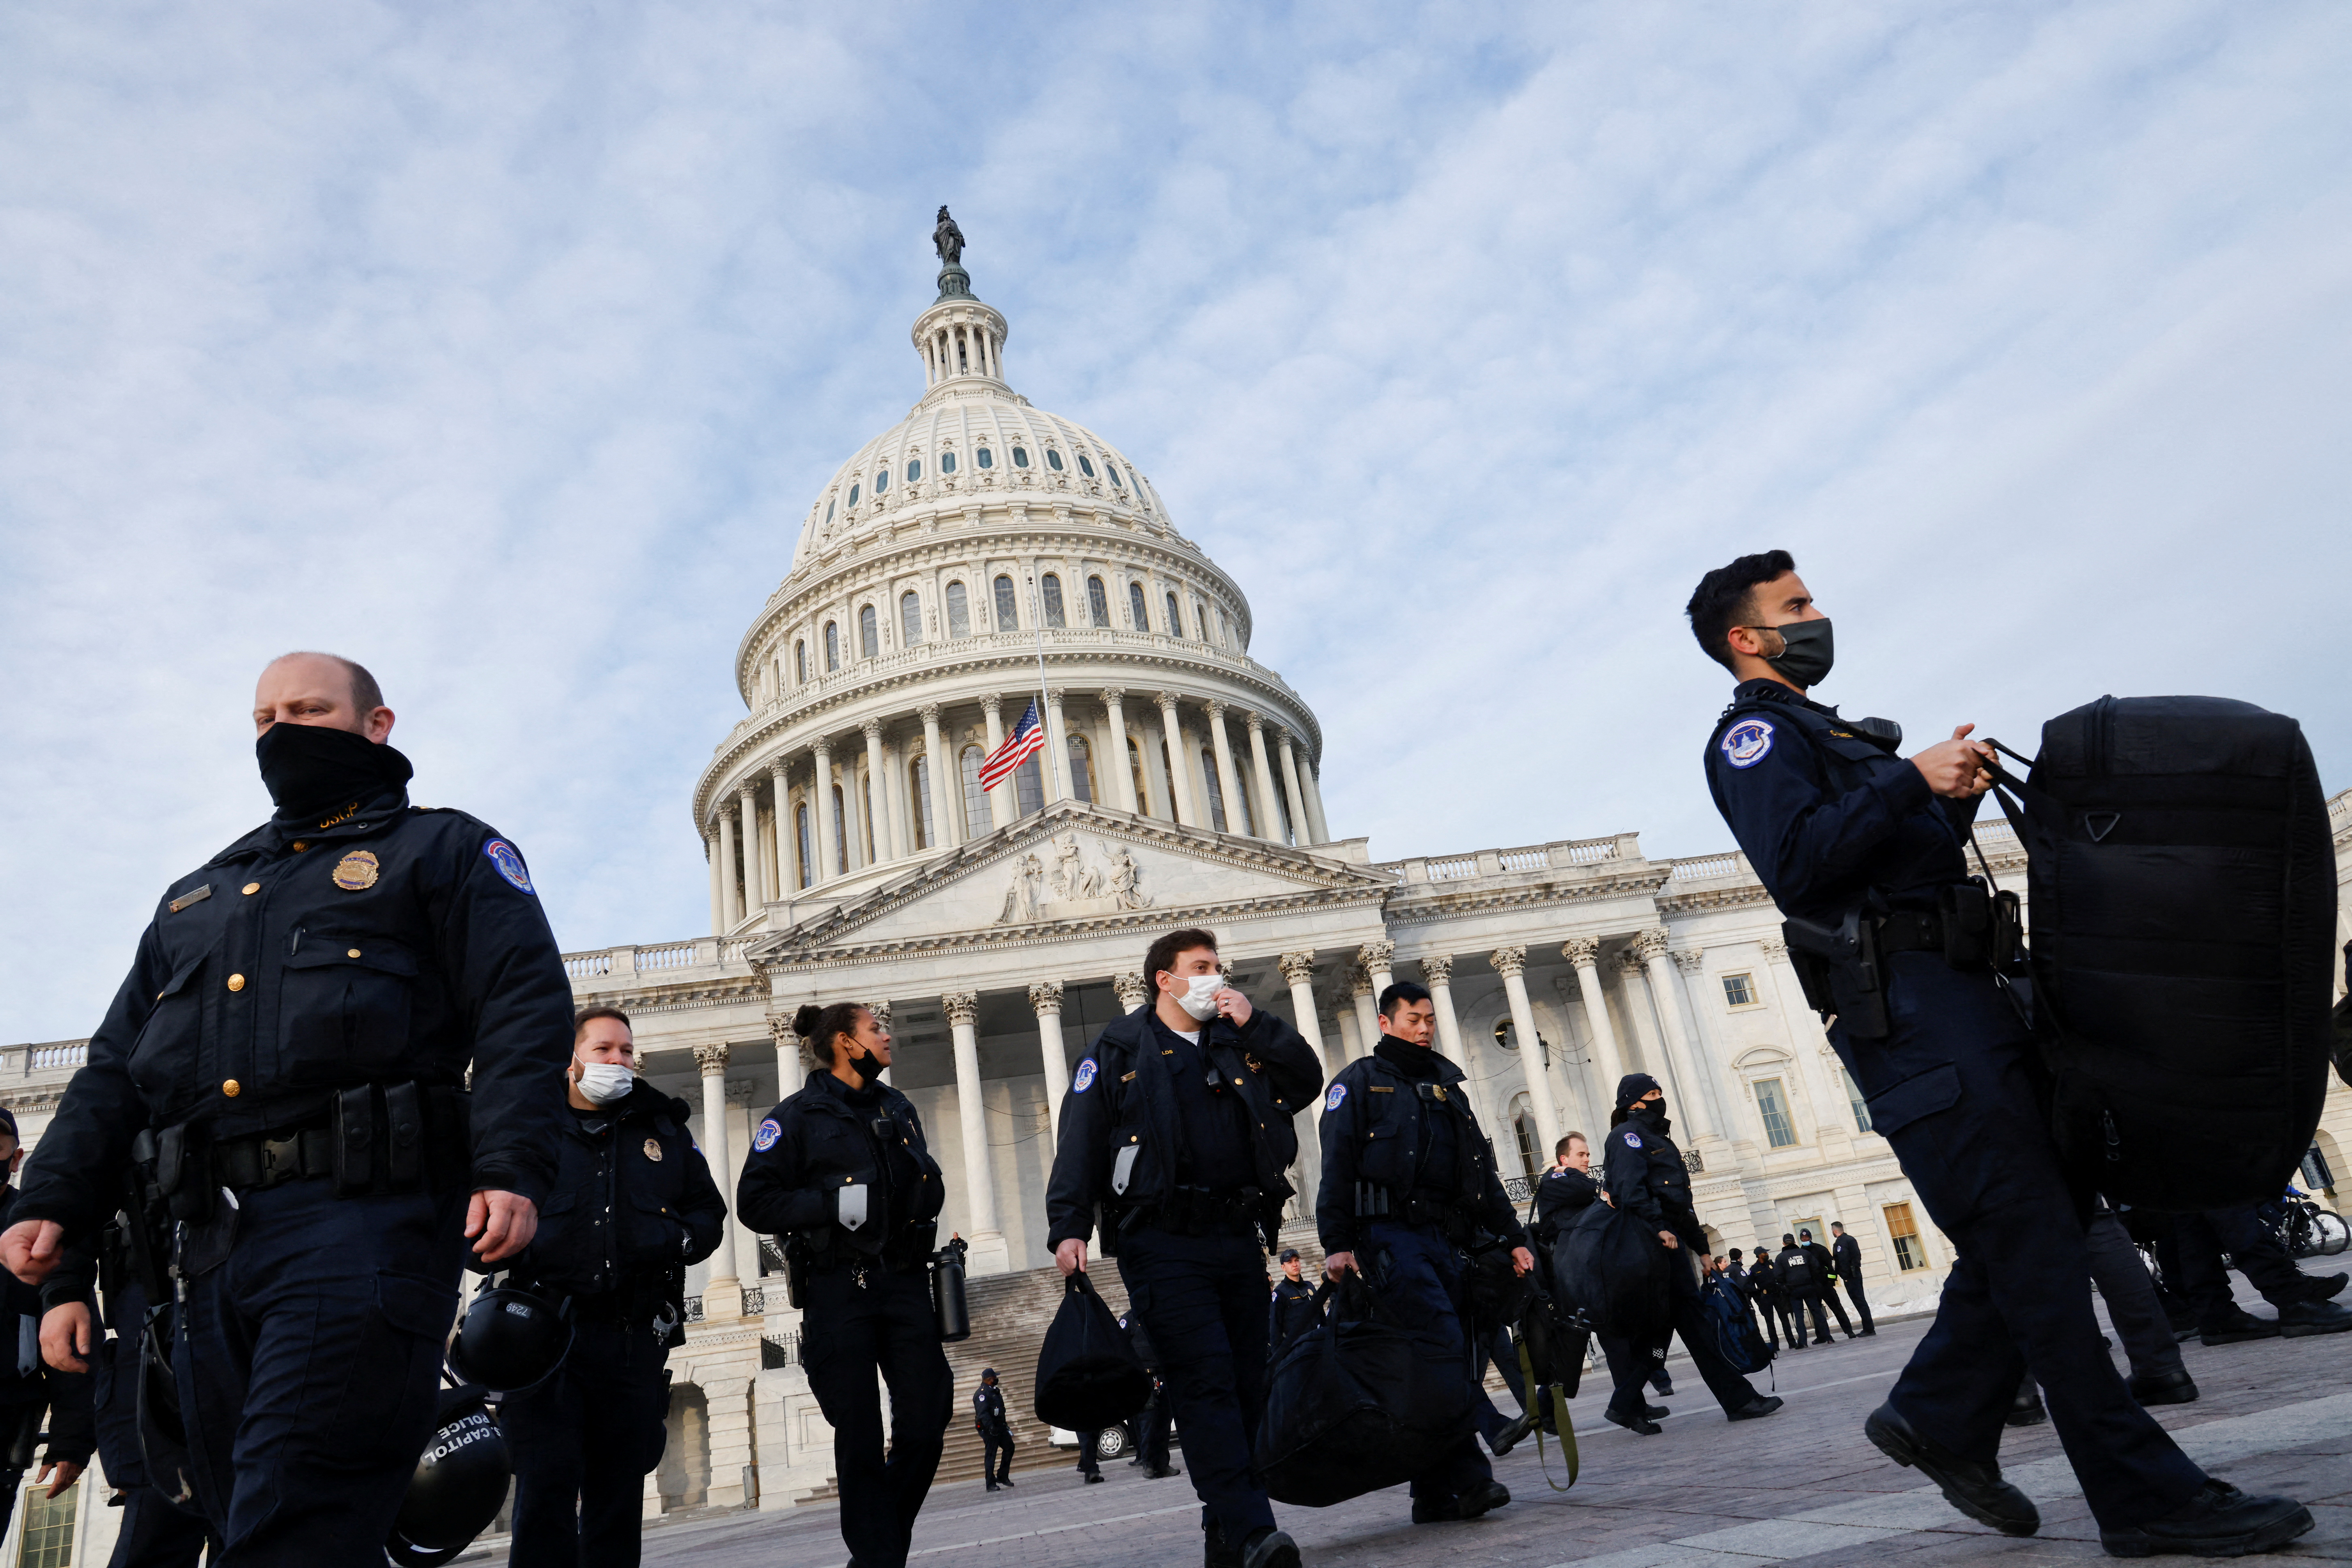 U.S. Capitol Police members walk in front of the U.S. Capitol on the first anniversary of the January 6, 2021 attack on the Capitol by supporters of former President Donald Trump, on Capitol Hill in Washington, U.S., January 6, 2022. REUTERS/Jonathan Ernst